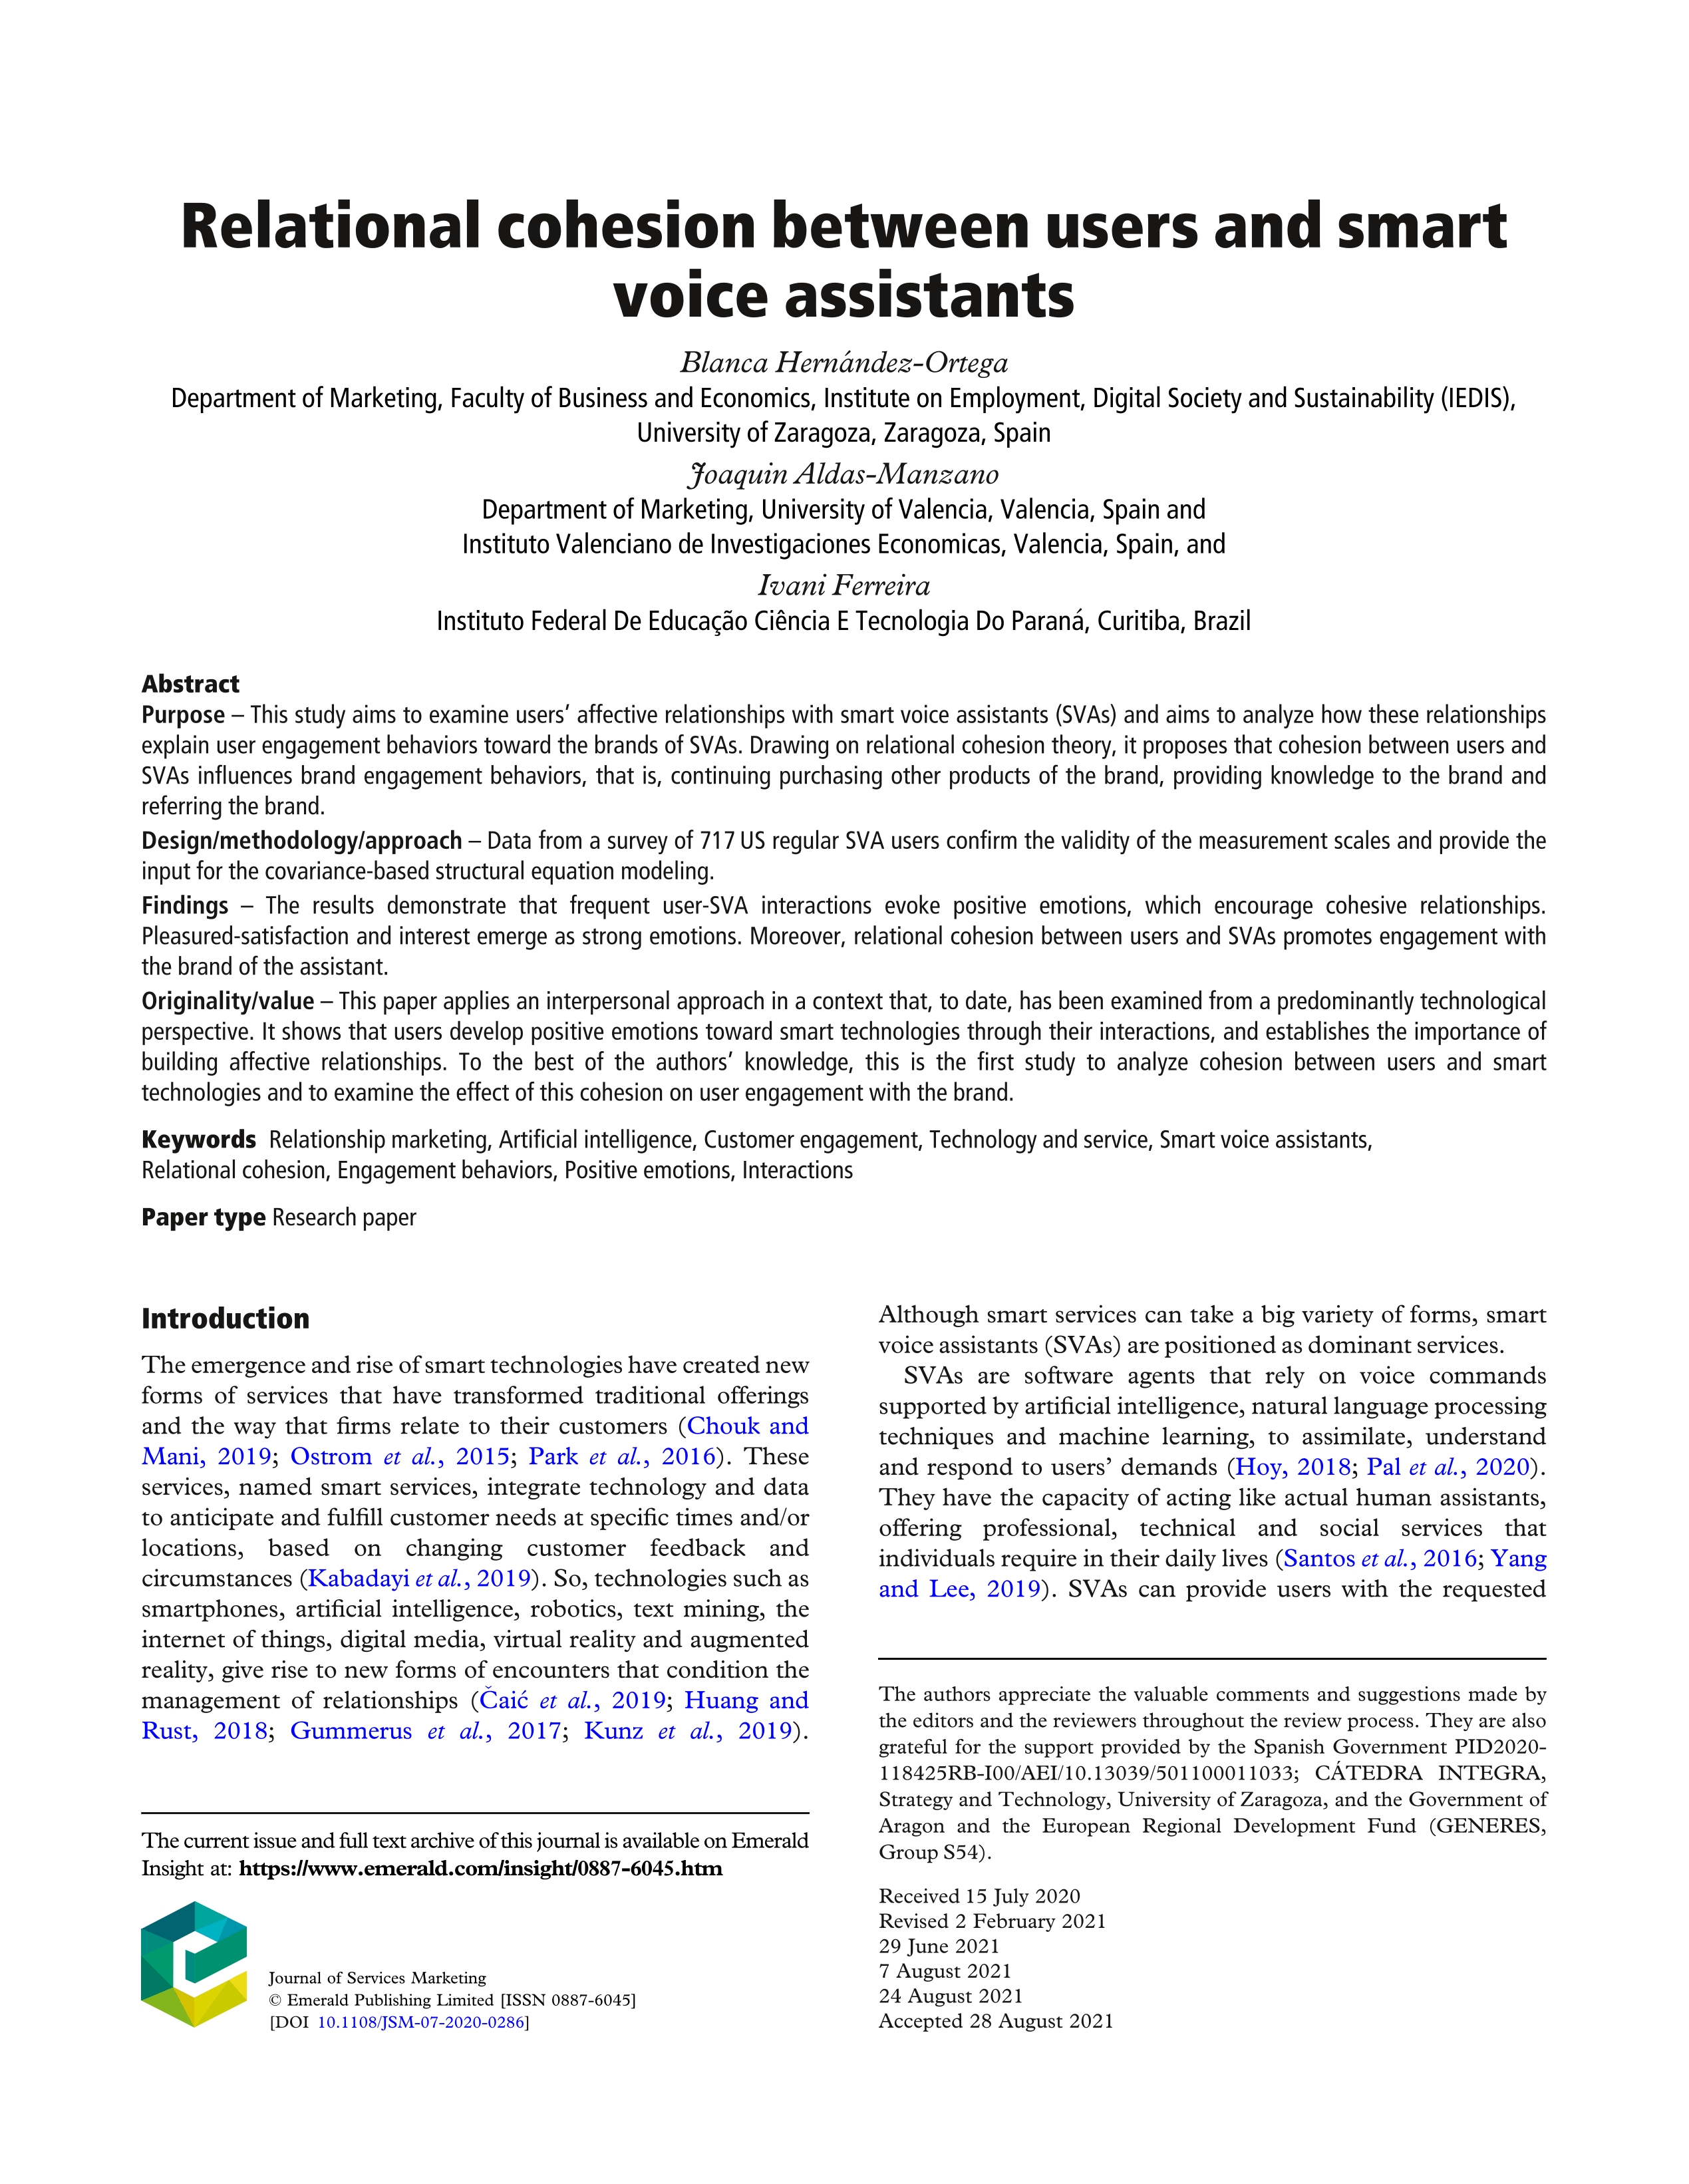 Relational cohesion between users and smart voice assistants